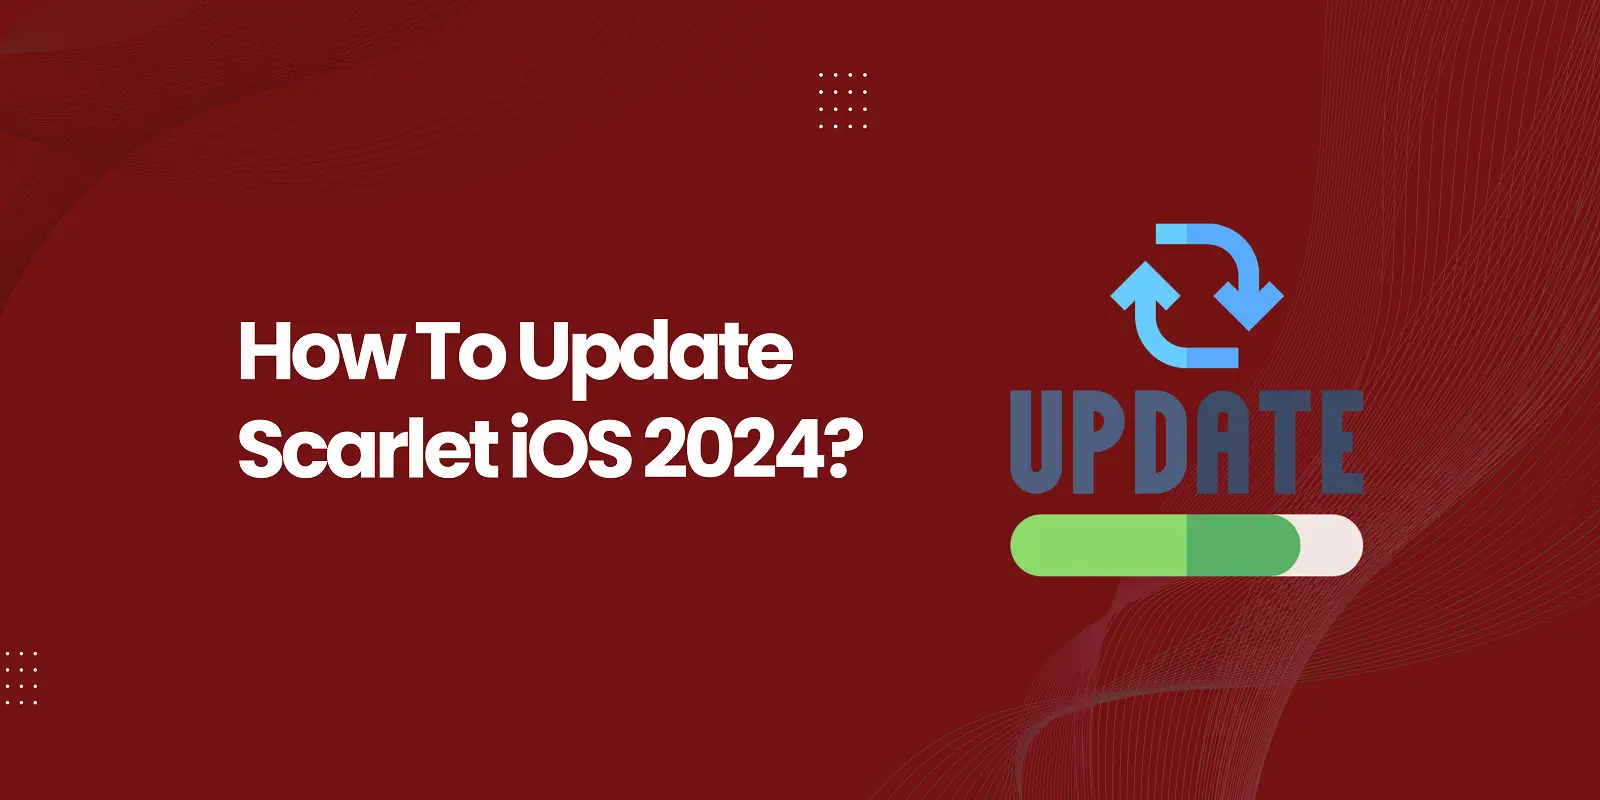 How To Update Scarlet iOS in 2024?